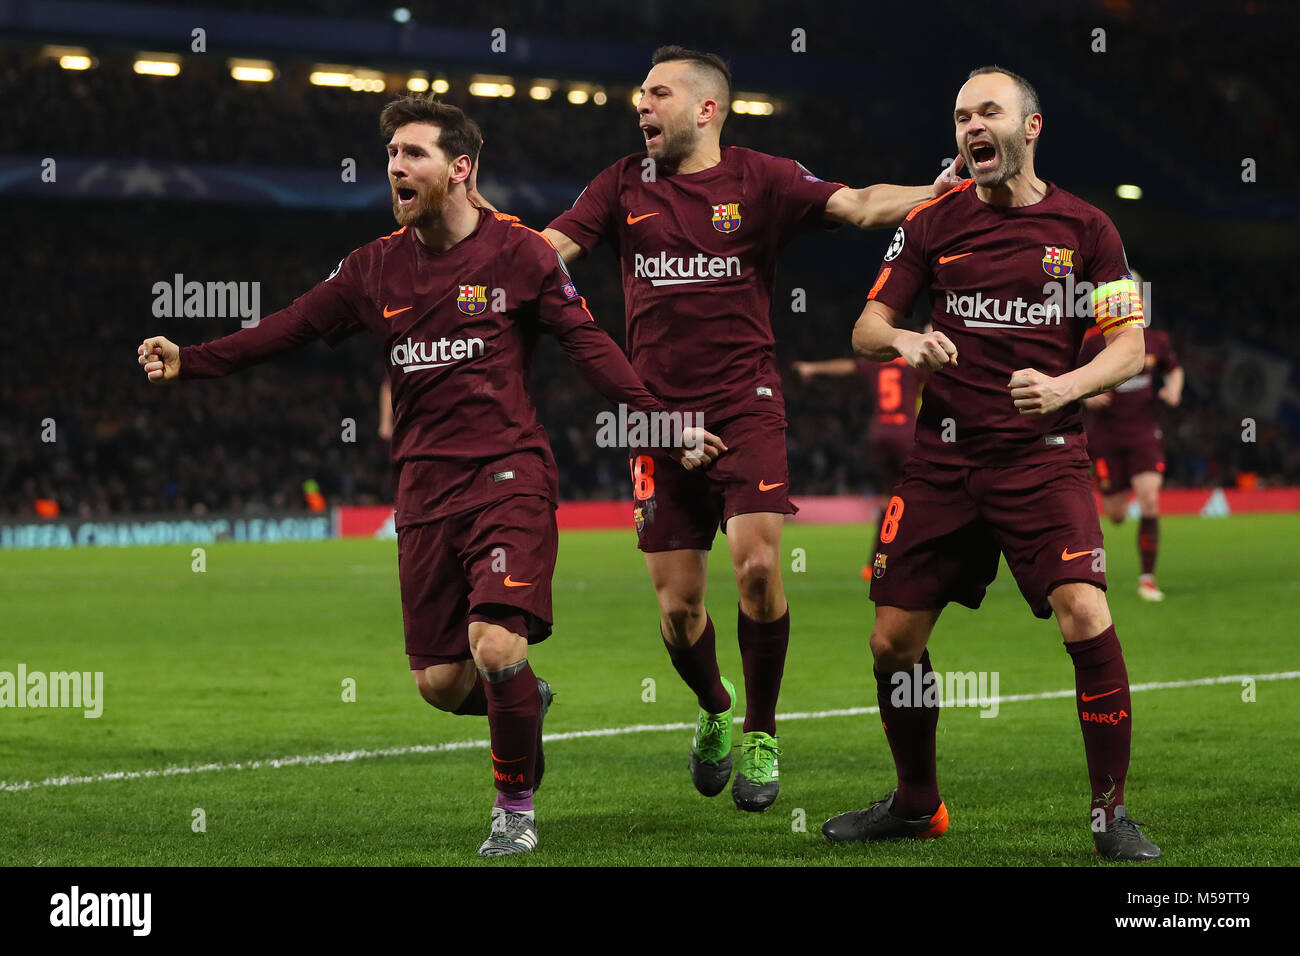 London, UK. 20th February, 2018. Lionel Messi (left) of Barcelona celebrates with Jordi Alba (centre) and Andres Iniesta (right) after scoring the equalising goal, making it 1-1- Chelsea v Barcelona, UEFA Champions League, Round of 16, 1st Leg, Stamford Bridge, London - 20th February 2018. Credit: Richard Calver/Alamy Live News Stock Photo